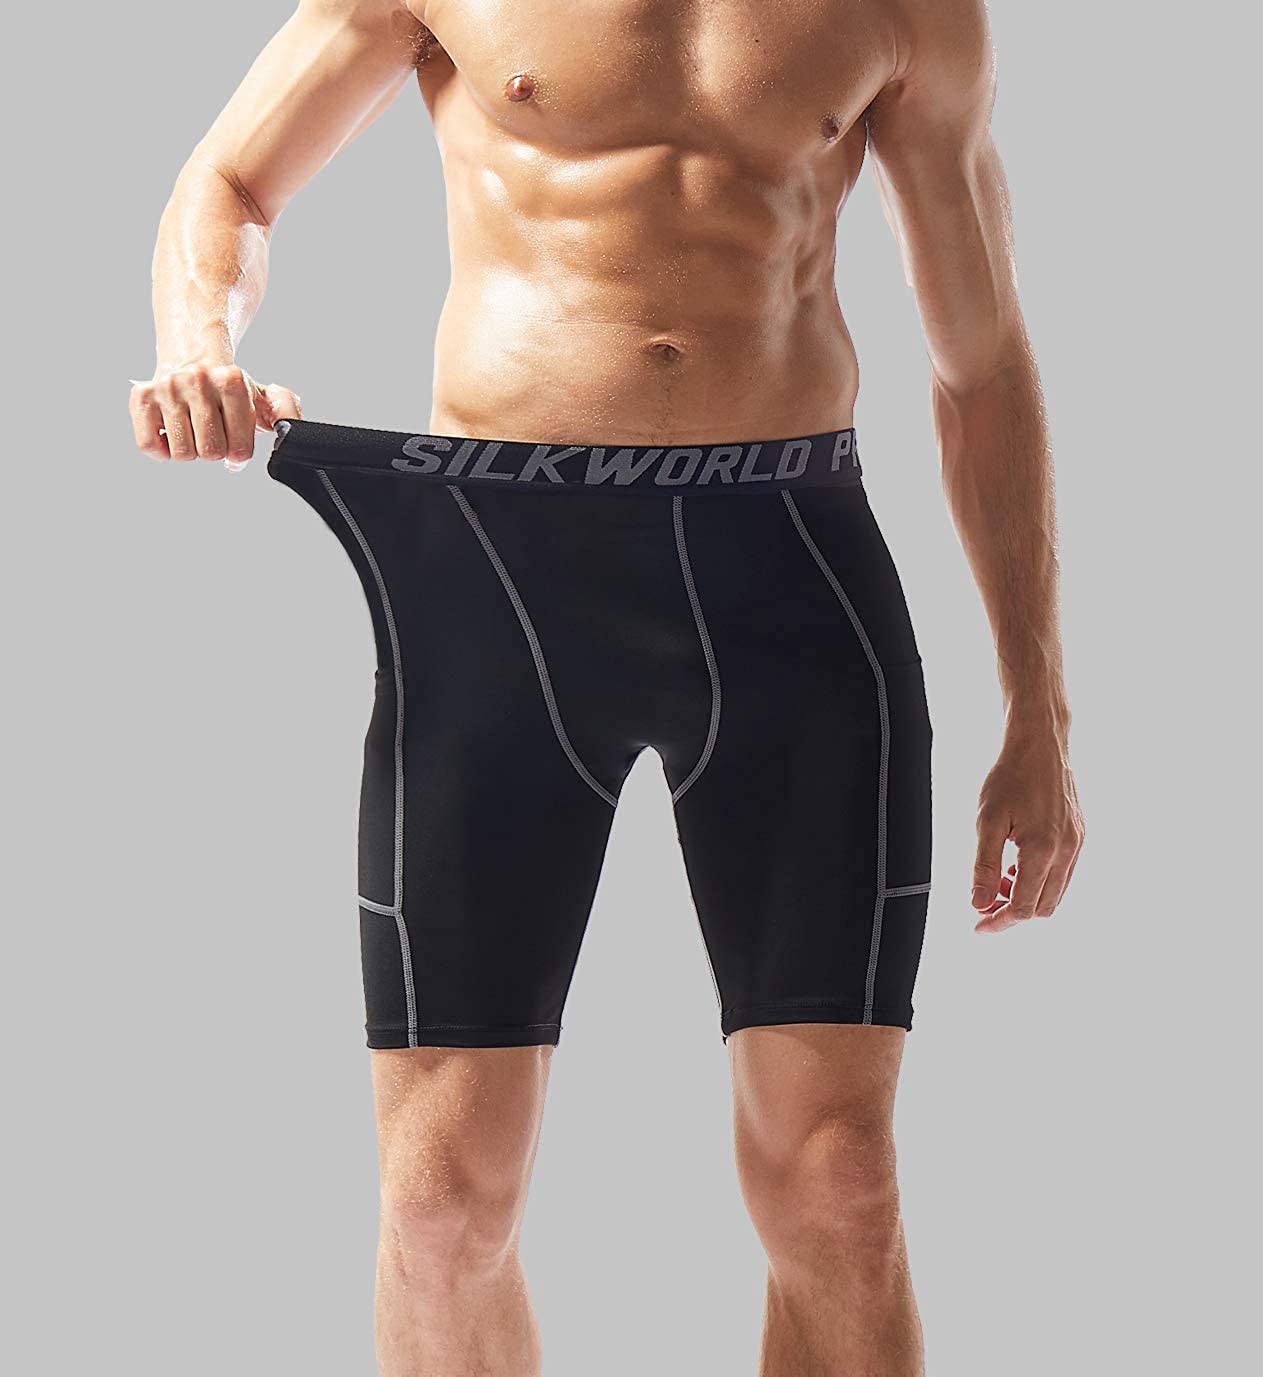 Men's 2 in 1 Running Shorts with Pockets Compression Liner Gym